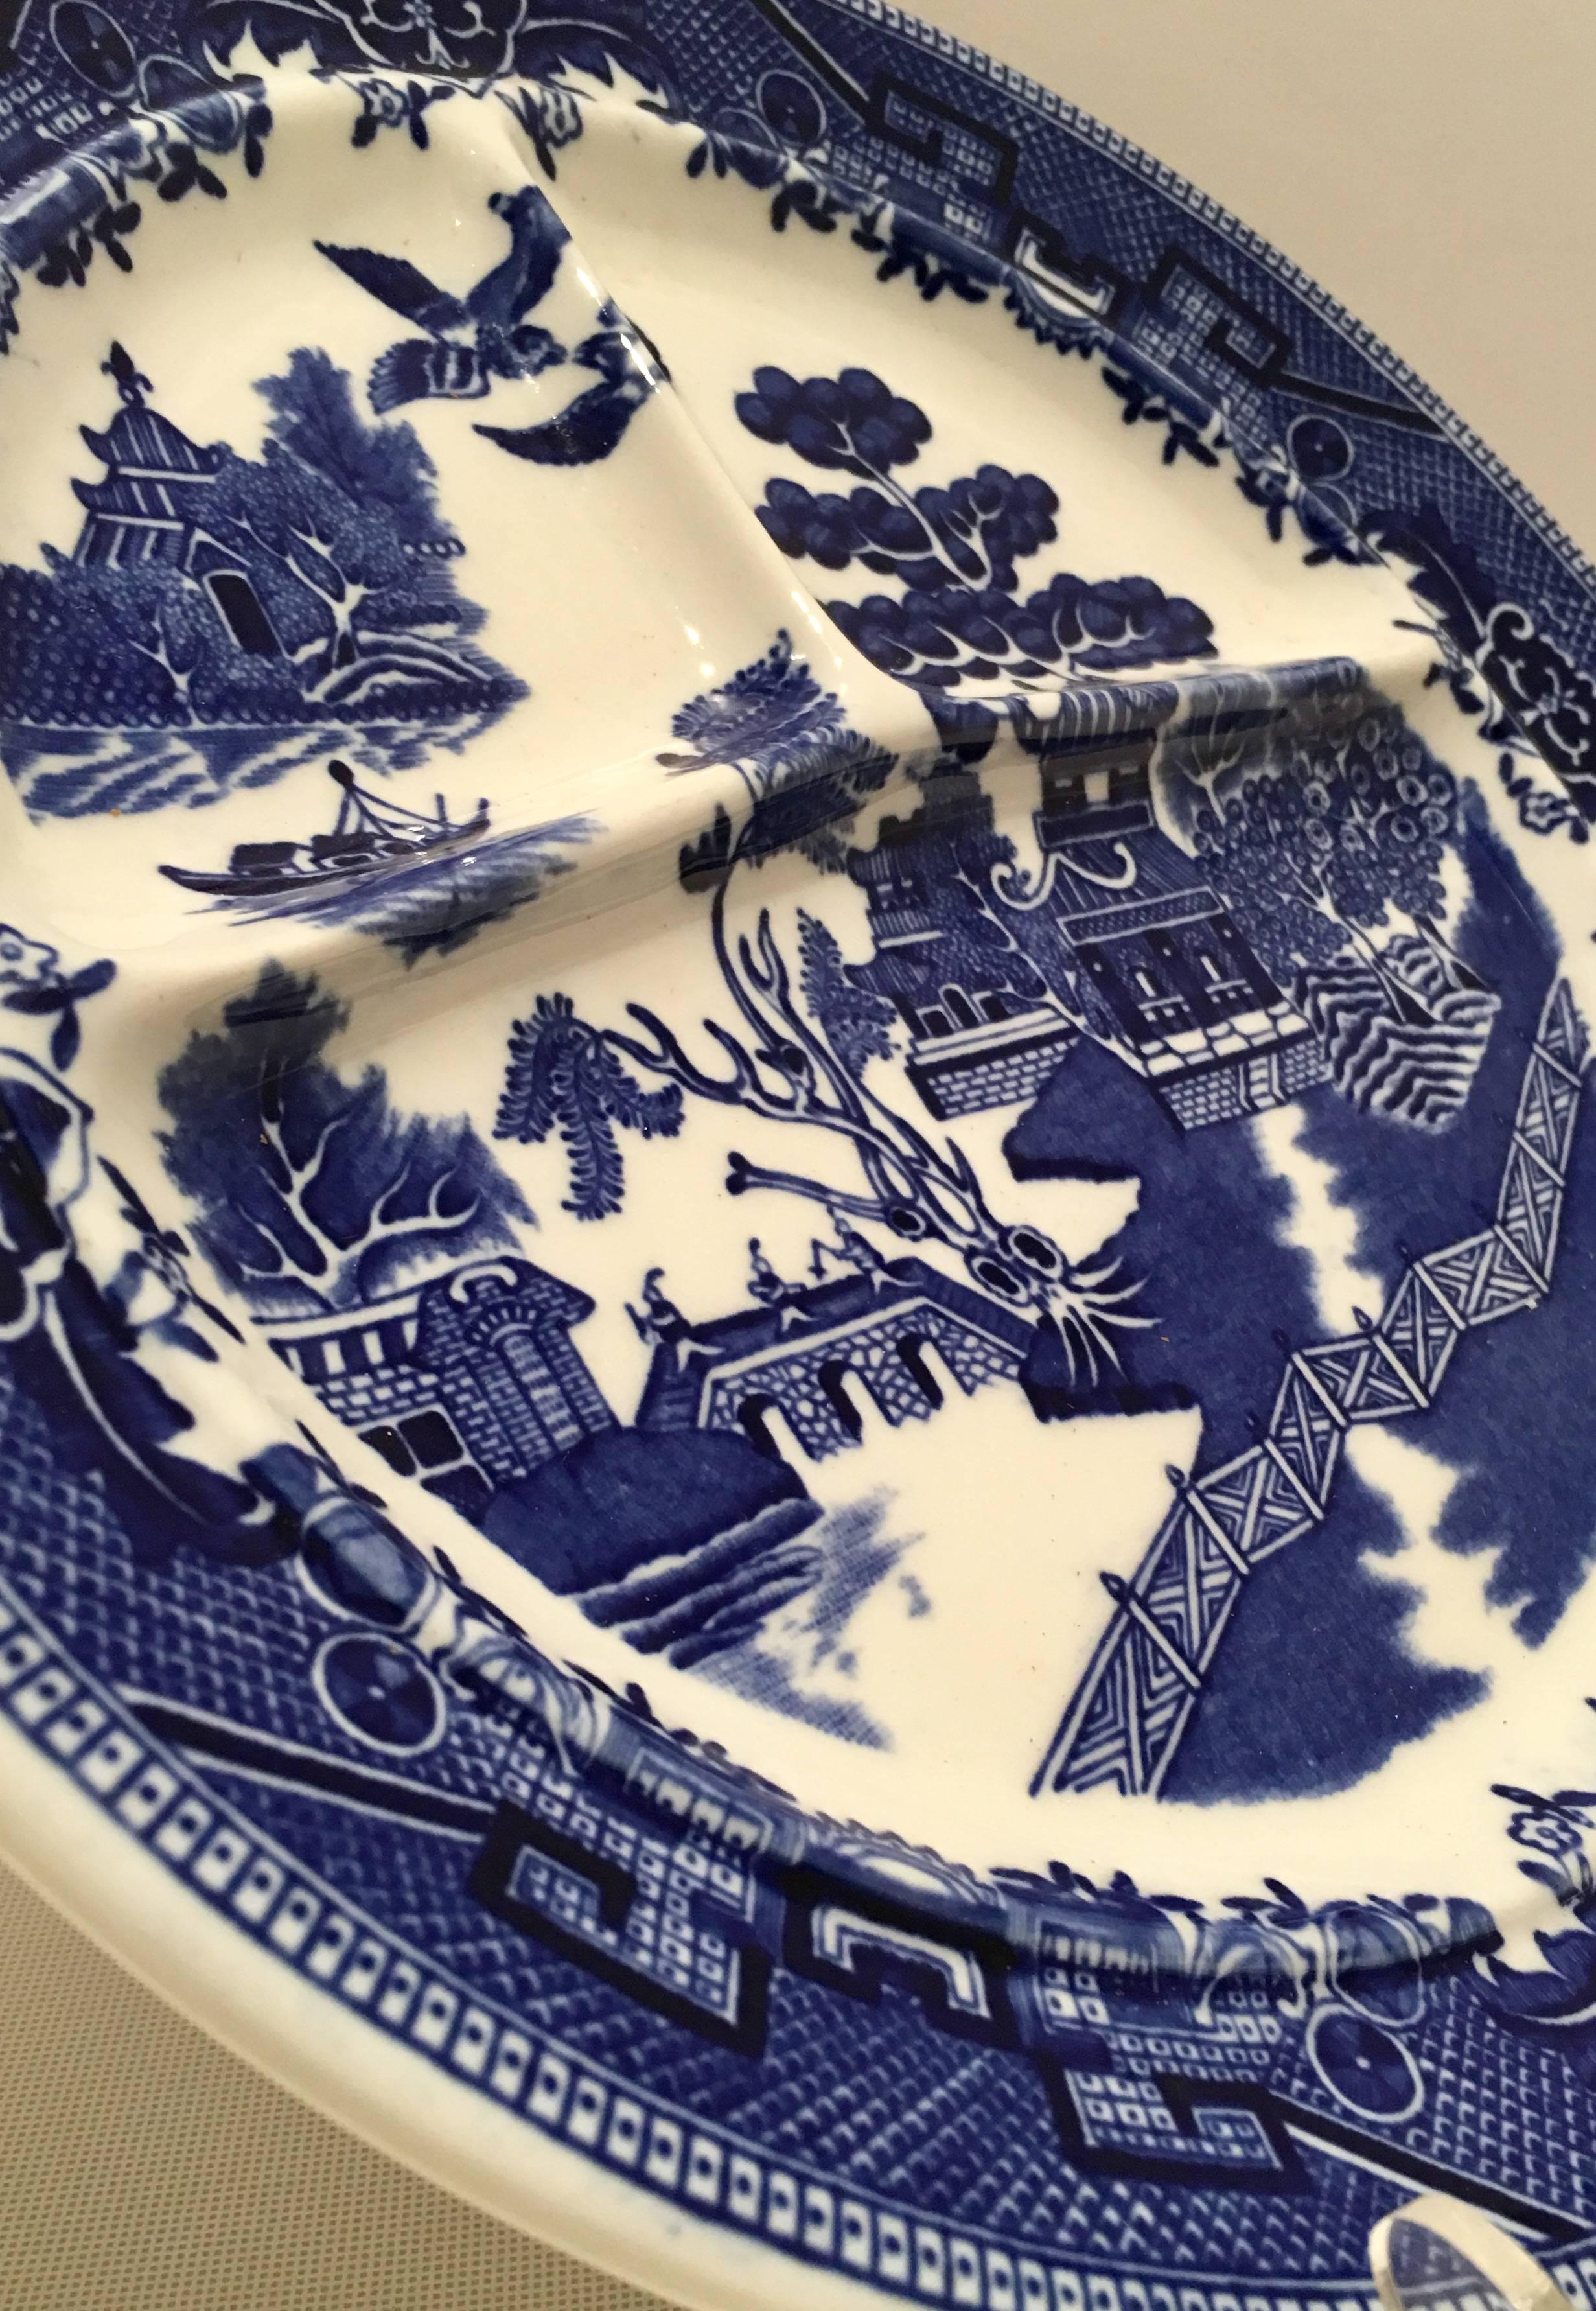 divided dinner plates for adults ceramic